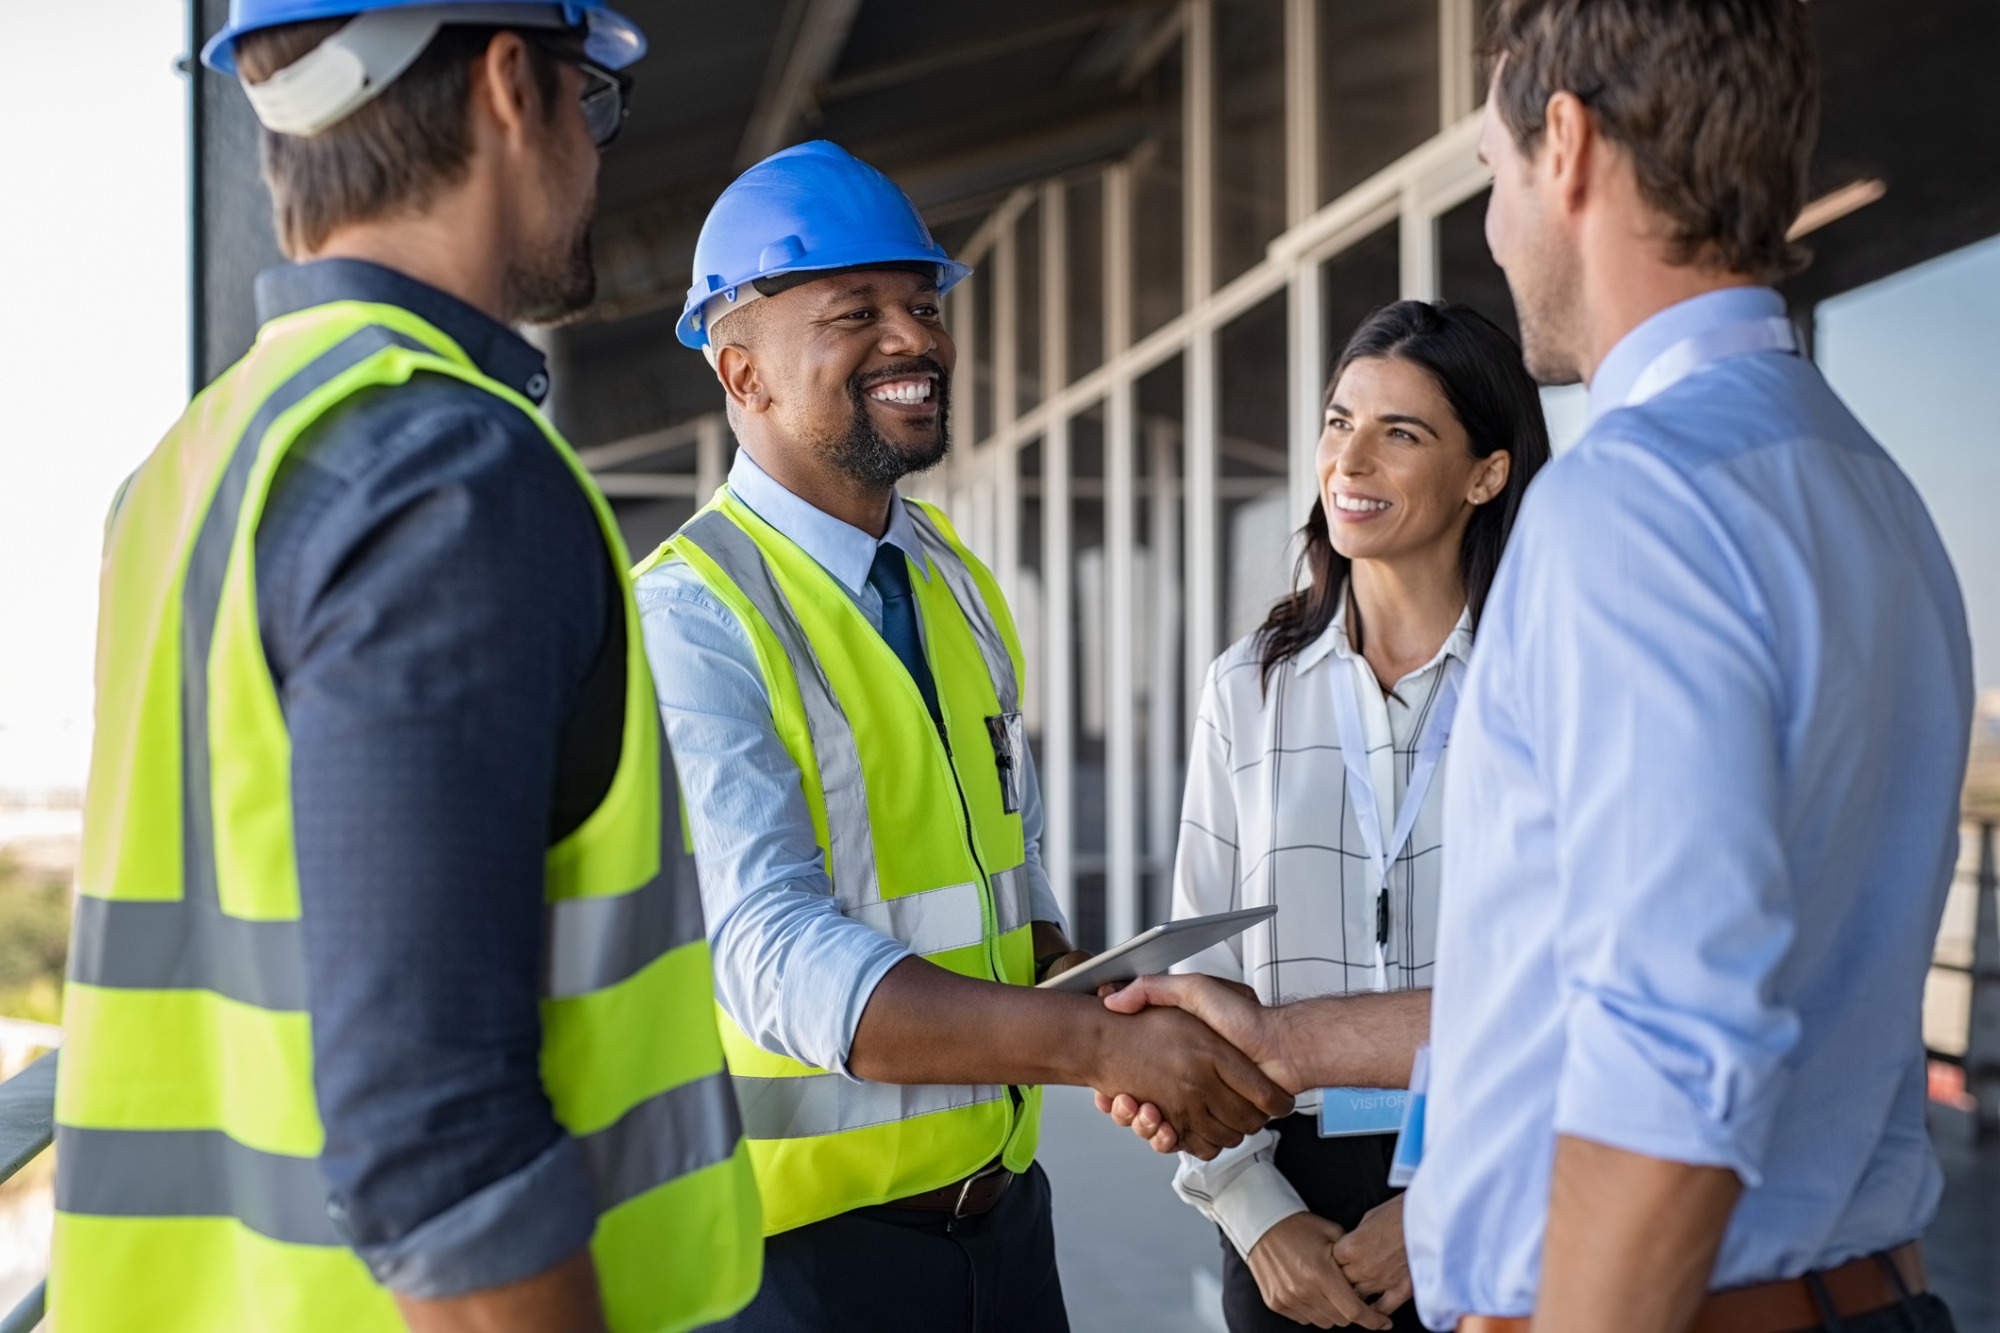 engineer-and-businessman-handshake-at-construction-site-picture-id1189913170.jpg